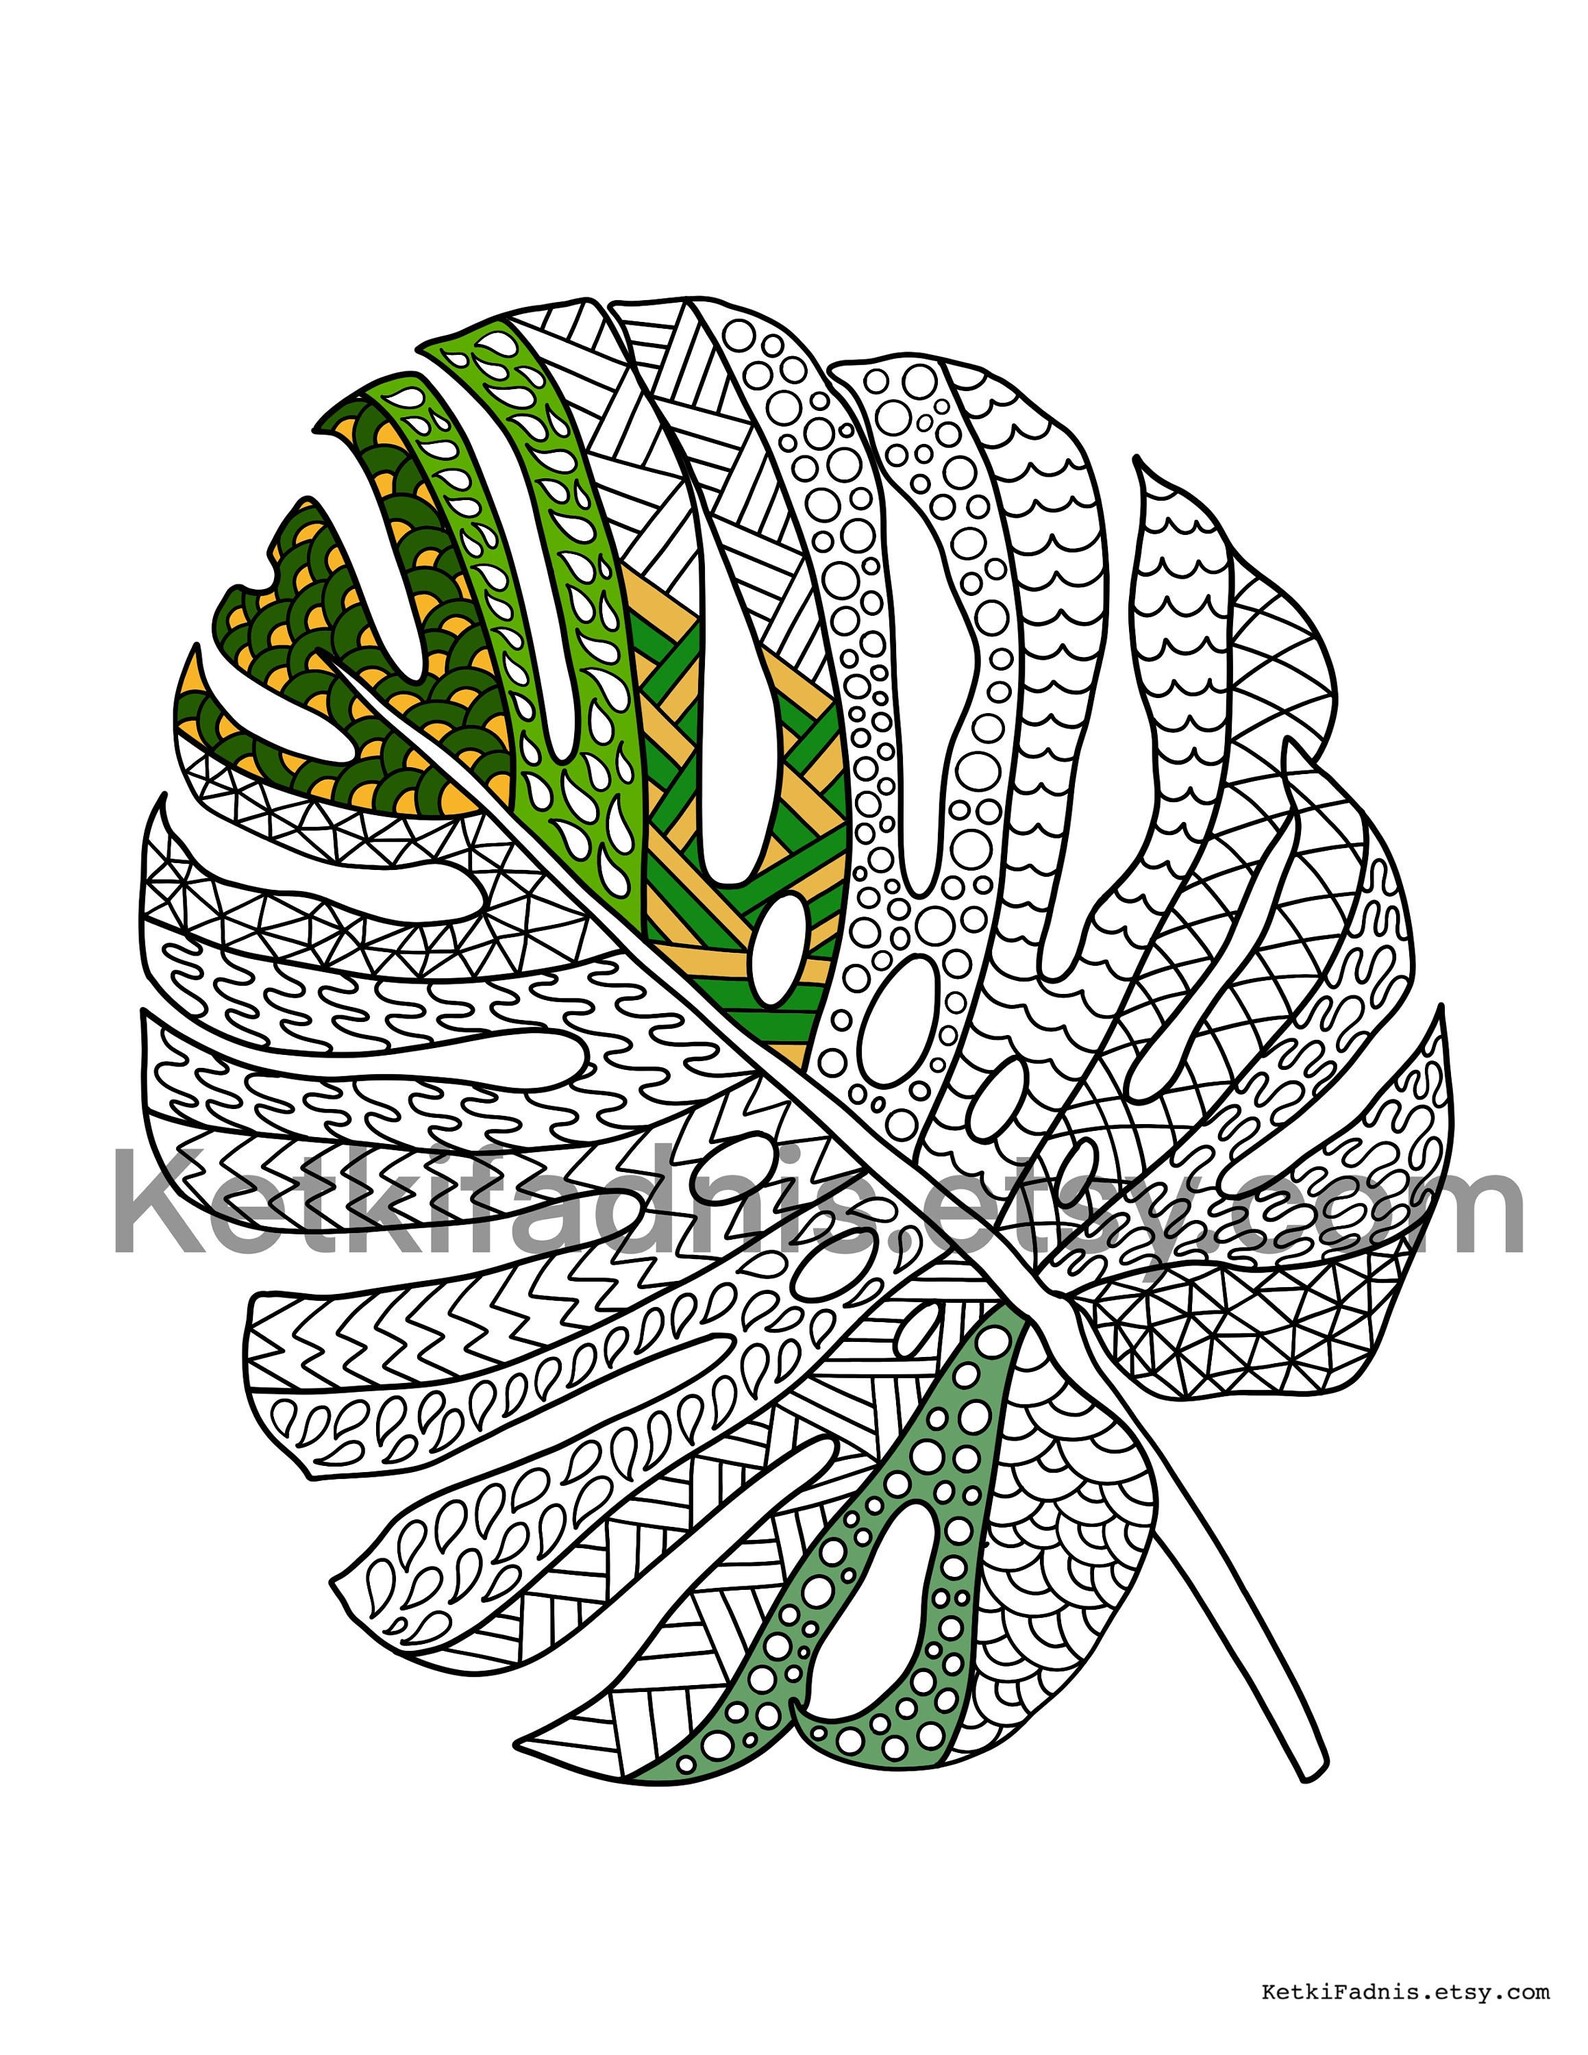 Monstera Leaf Coloring Page Flower Coloring Page PDF | Etsy